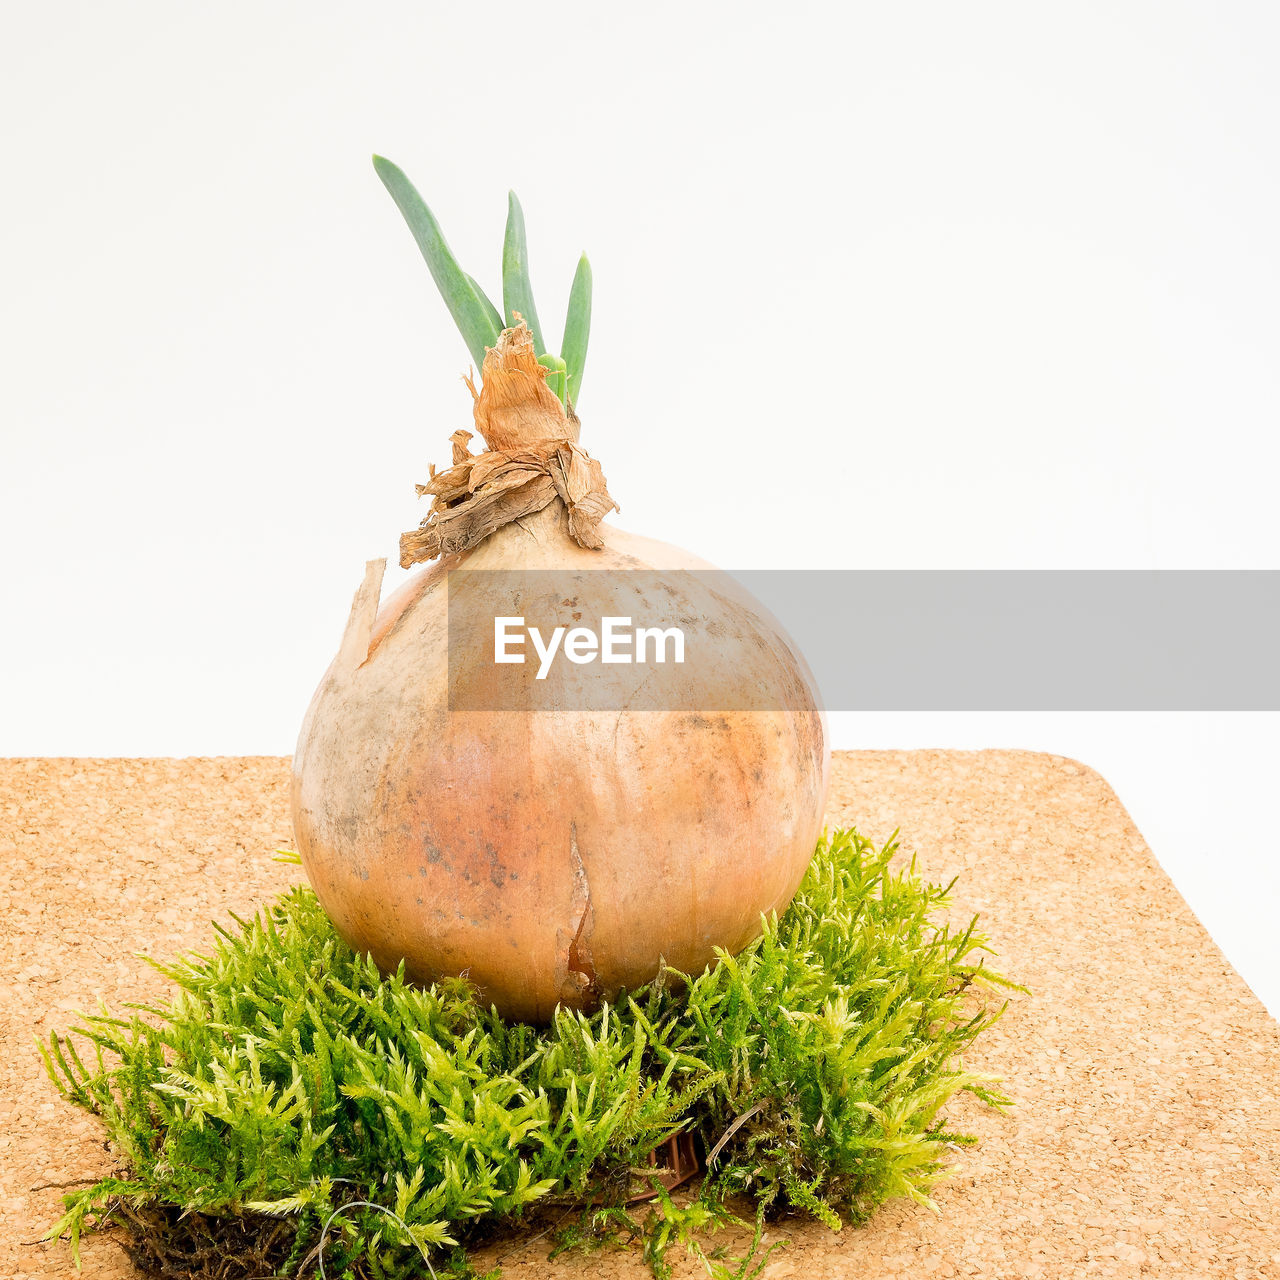 food, food and drink, plant, healthy eating, produce, vegetable, wellbeing, freshness, studio shot, no people, nature, indoors, organic, green, ingredient, herb, cut out, close-up, spice, still life